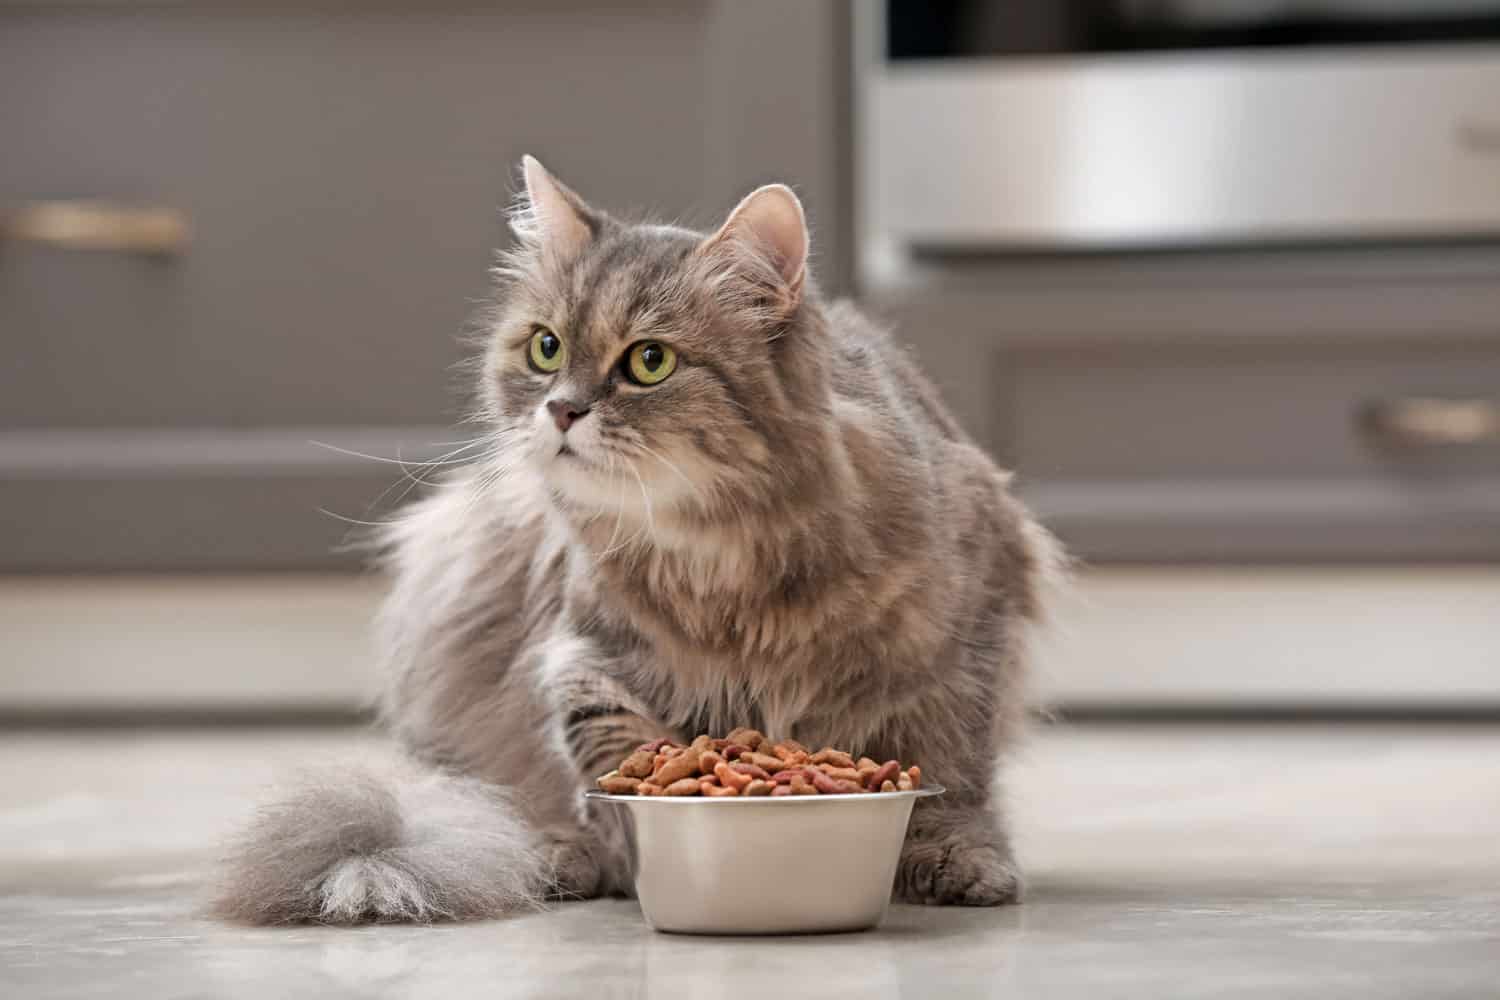 Cute cat near bowl with food at home
